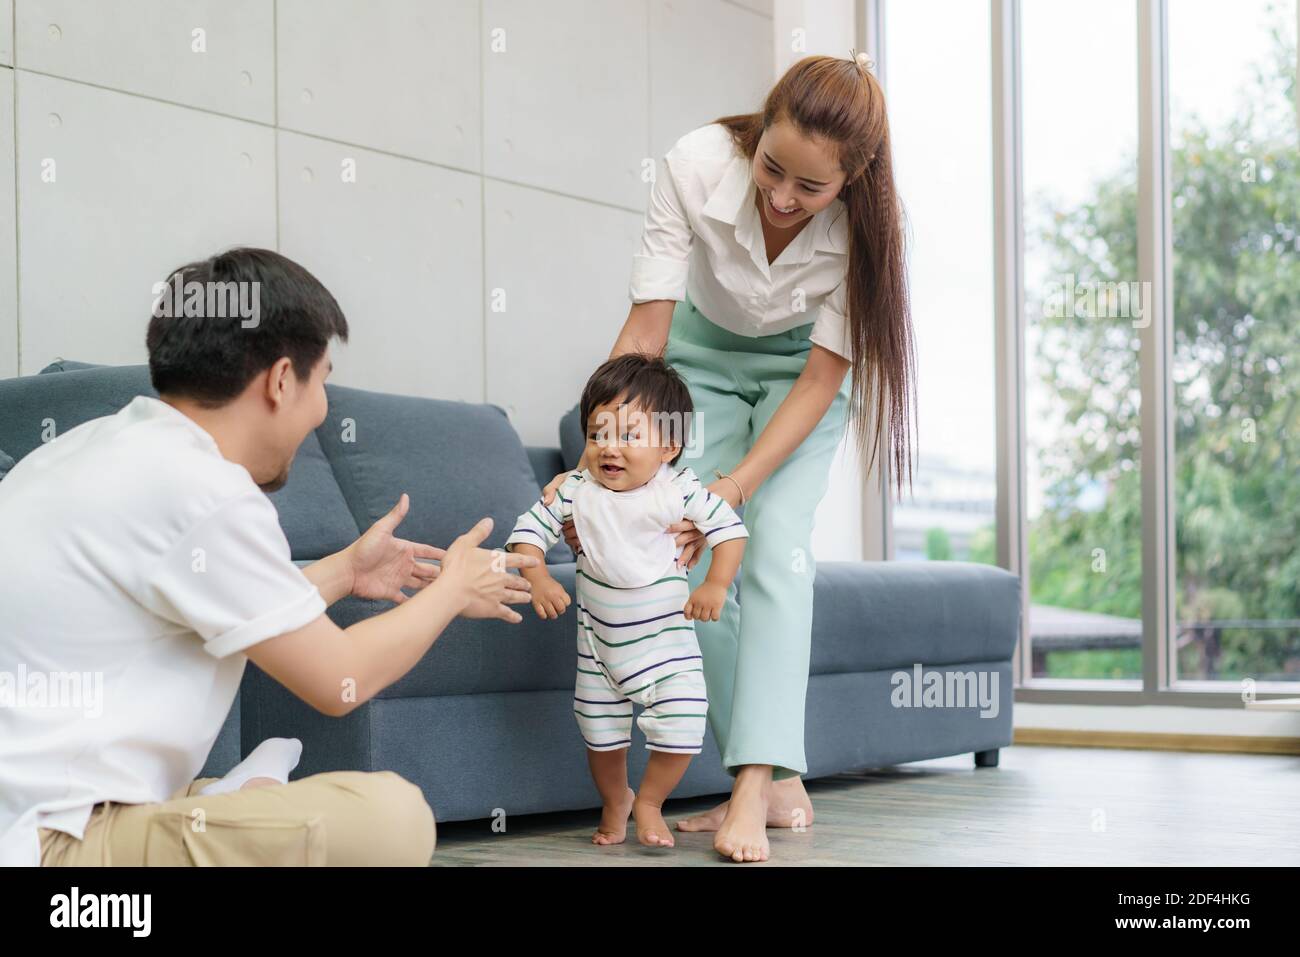 Asian son baby taking first steps walk forward to his father. Happy little baby learning to walk with mother help and teaching how to walk gentlyat ho Stock Photo